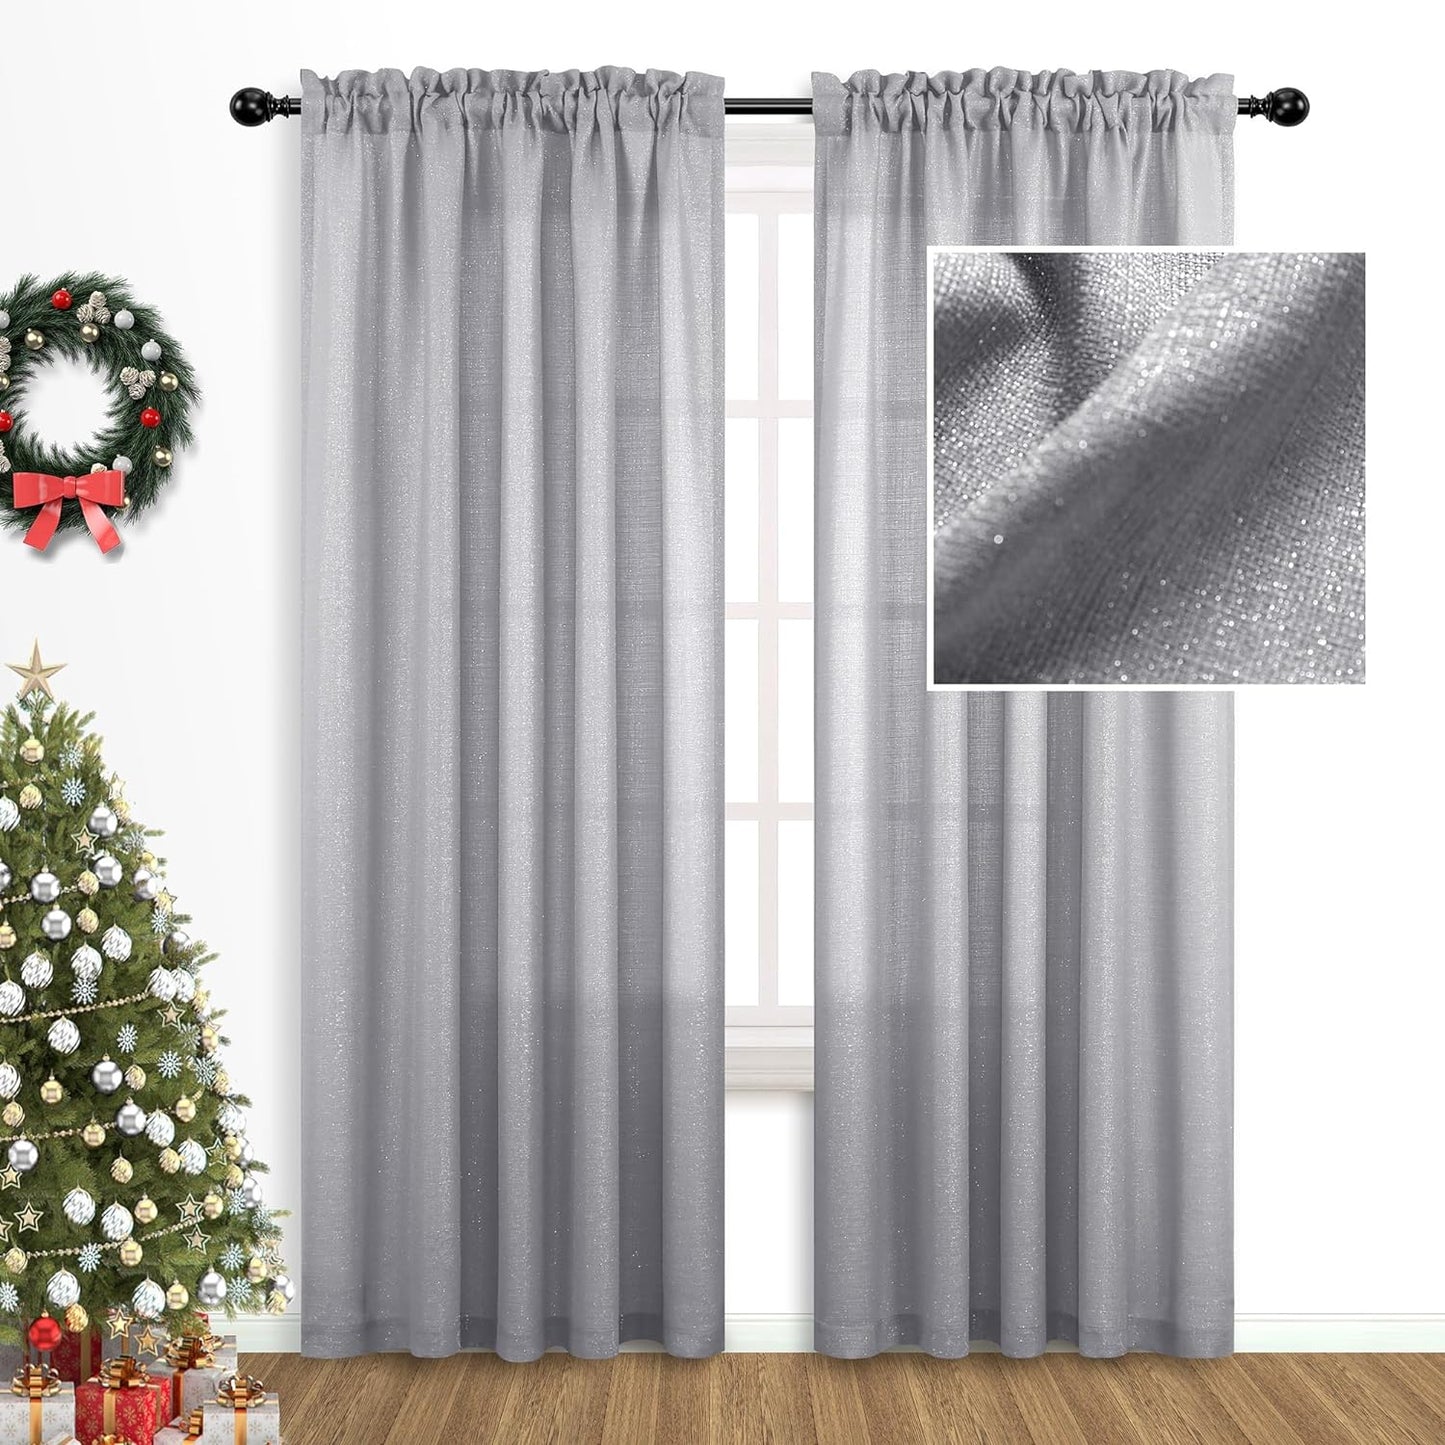 Gold Curtains 84 Inch Length for Living Room 2 Panels Set Rod Pocket Window Decor Semi Sheer Luxury Sparkle Shimmer Shiny Glitter Brown Golden Mustard Curtains for Bedroom 52X84 Long Christmas Decor  MRS.NATURALL TEXTILE Silver 52X84 